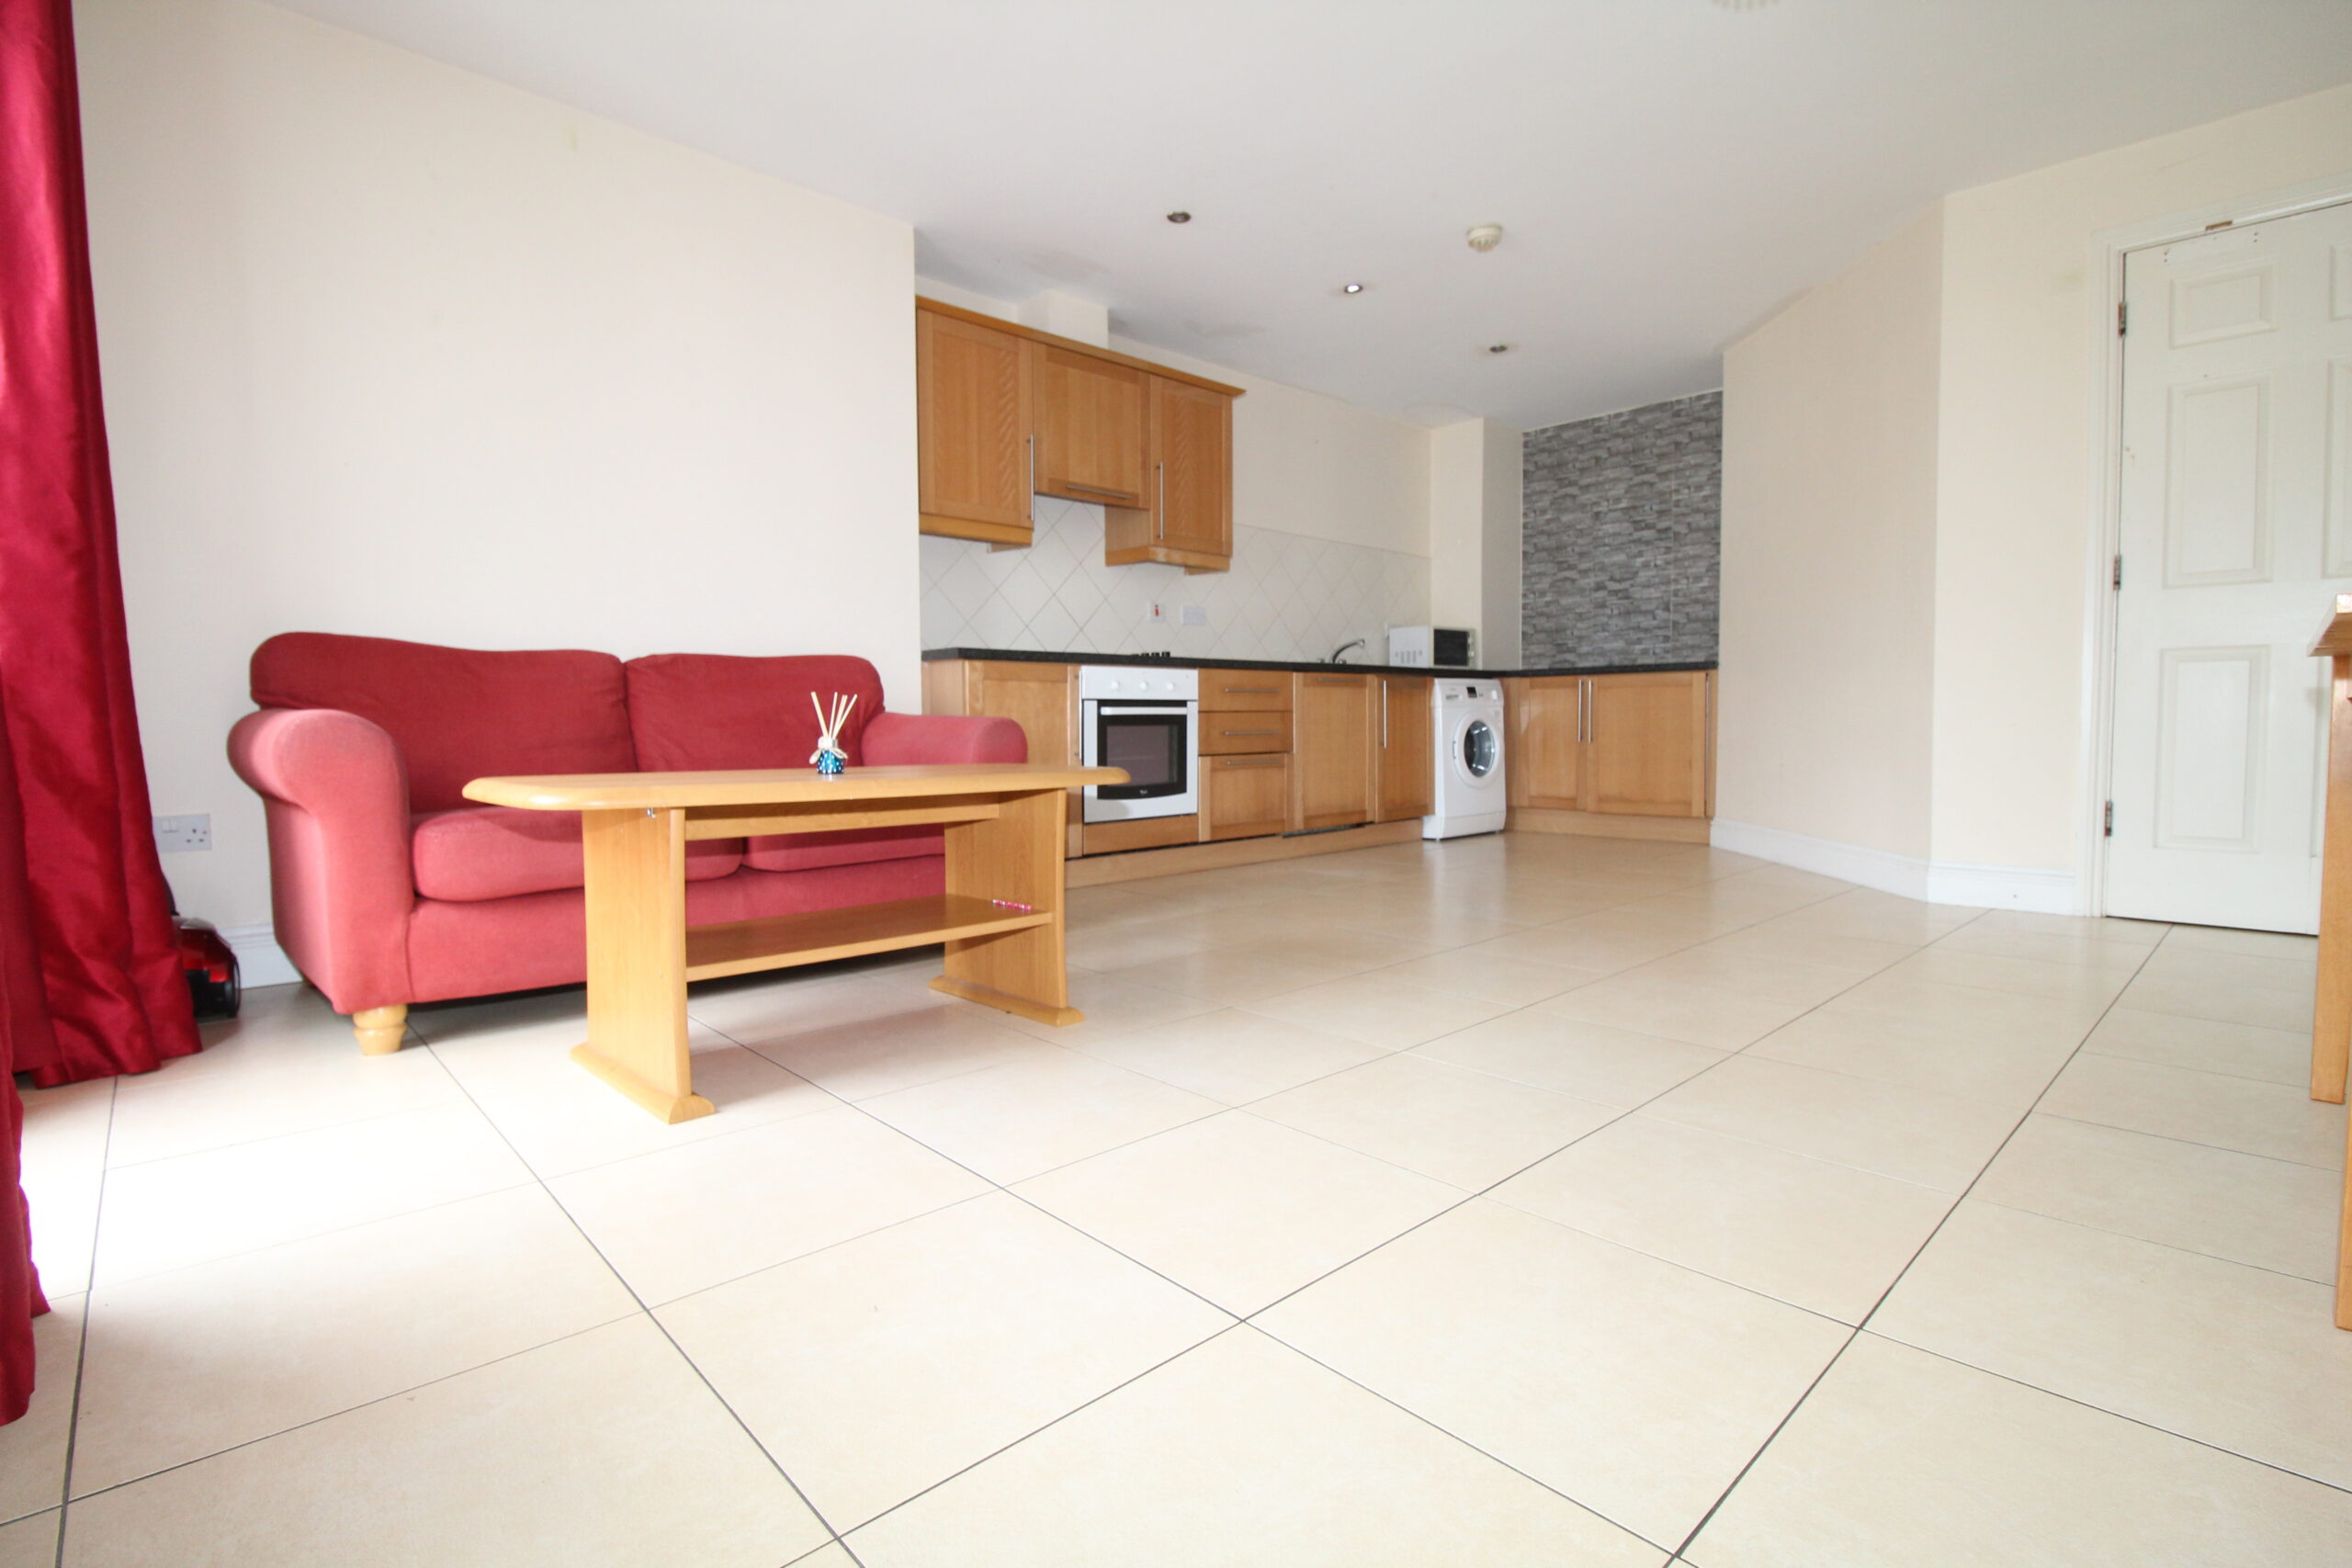 Apartment 5, Market Court, Tralee, Co. Kerry